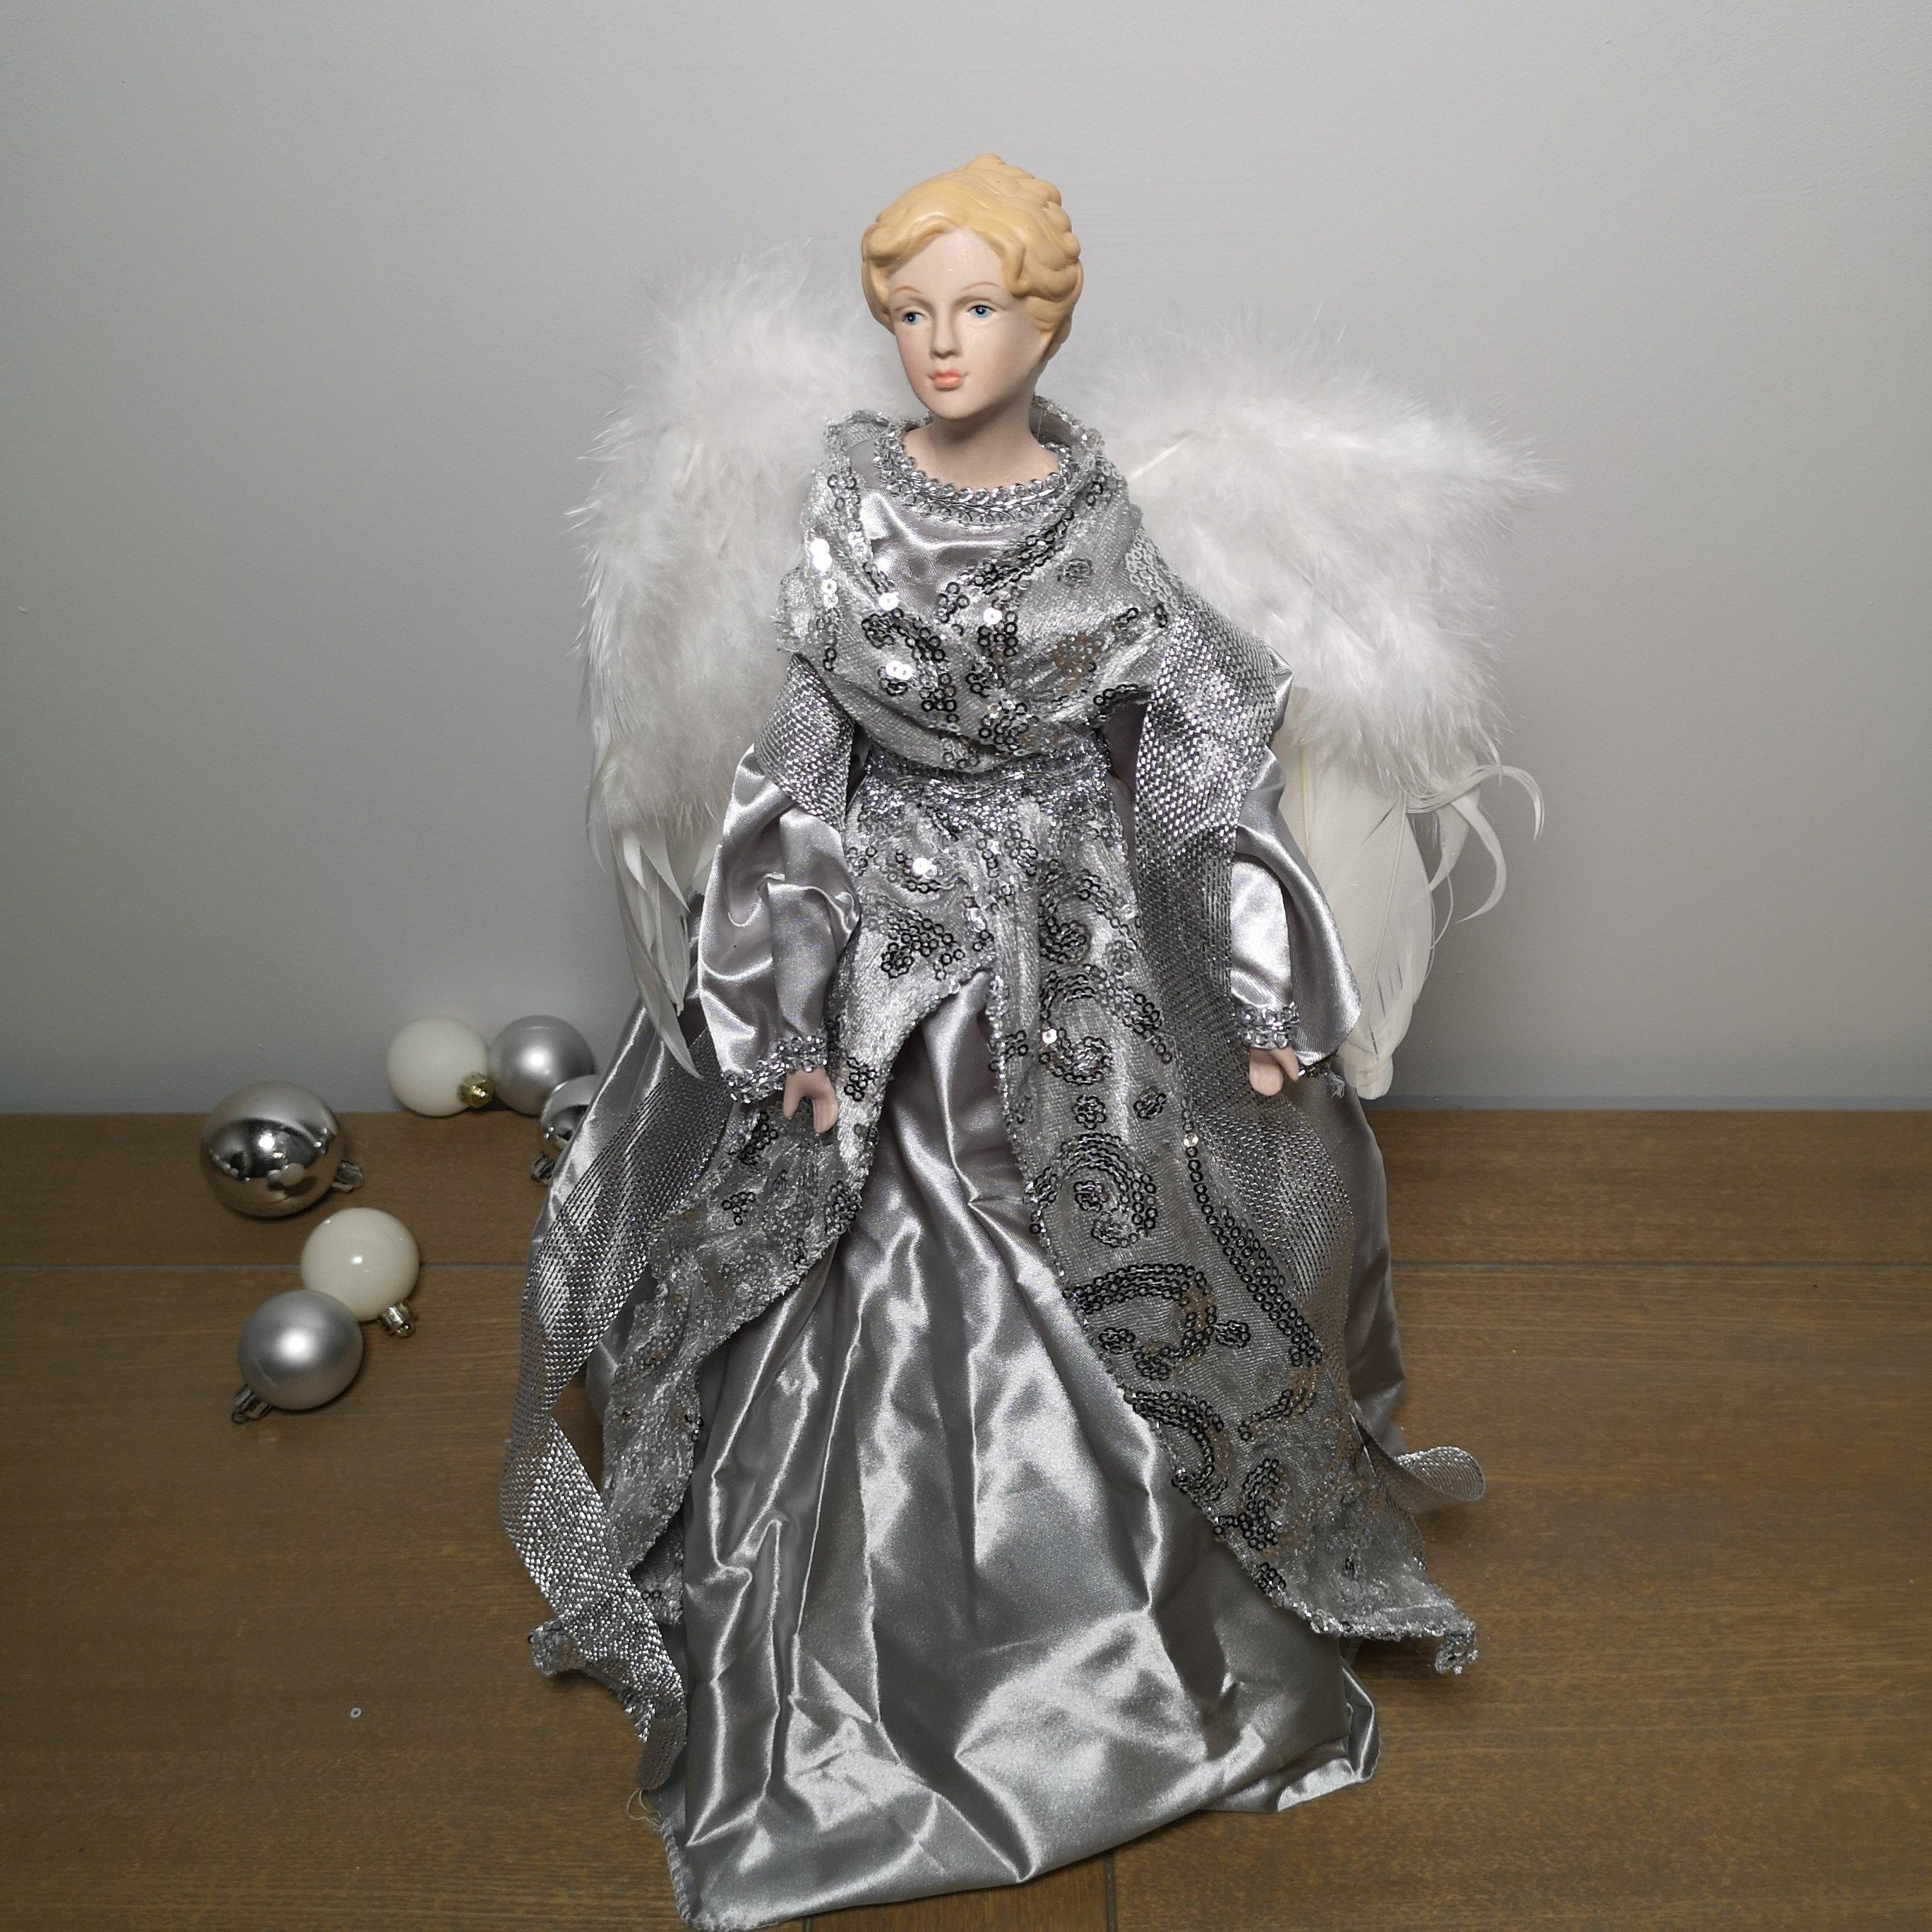 45cm Premier Christmas Tree Topper Angel Decoration in Grey and Silver - image 1